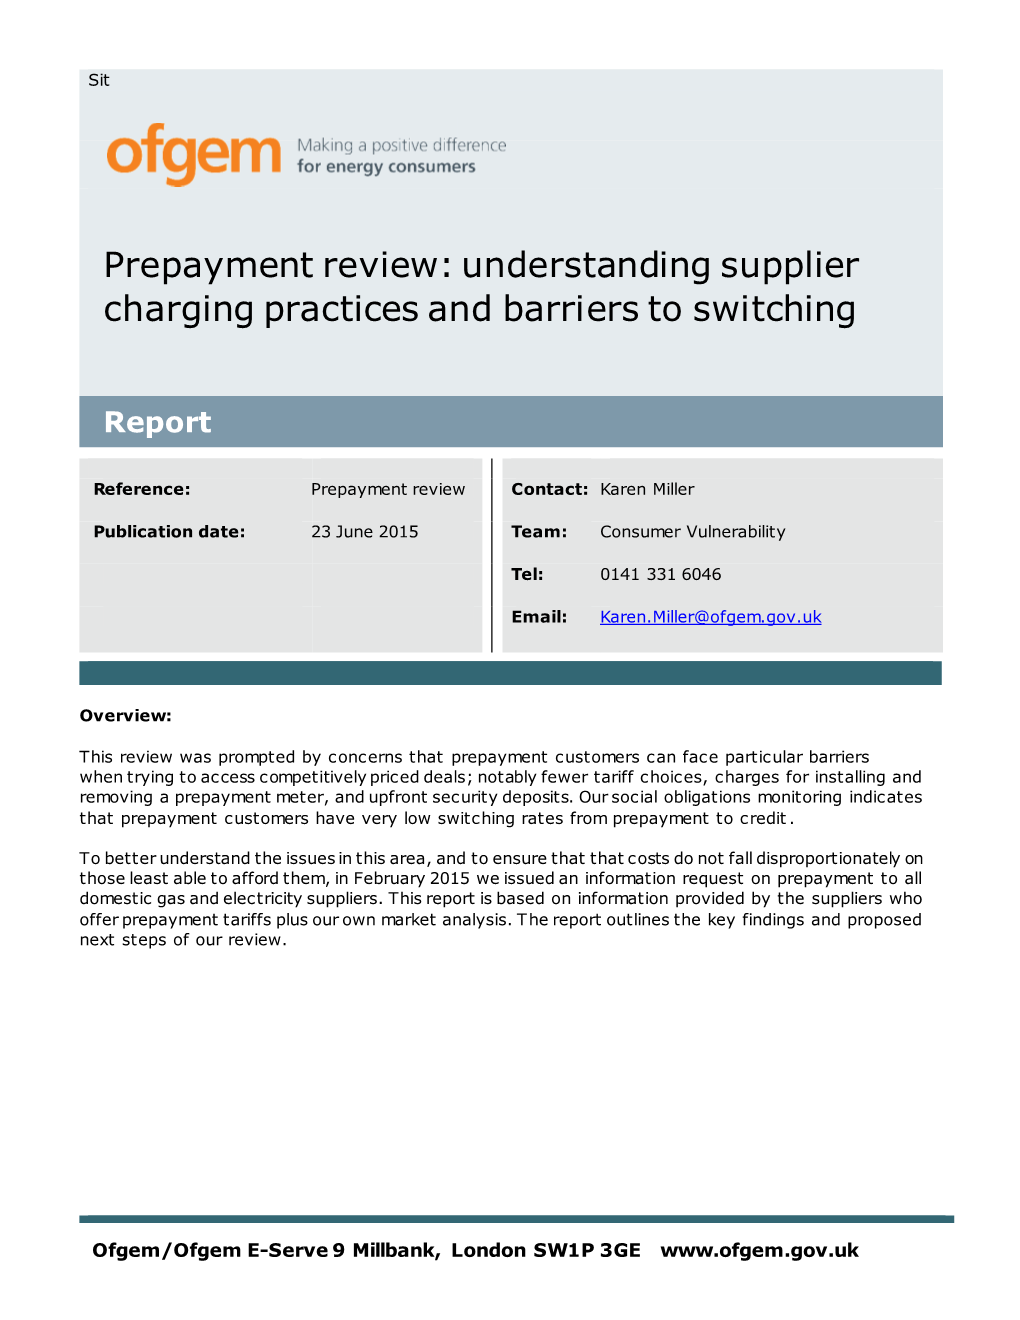 Understanding Supplier Charging Practices and Barriers to Switching